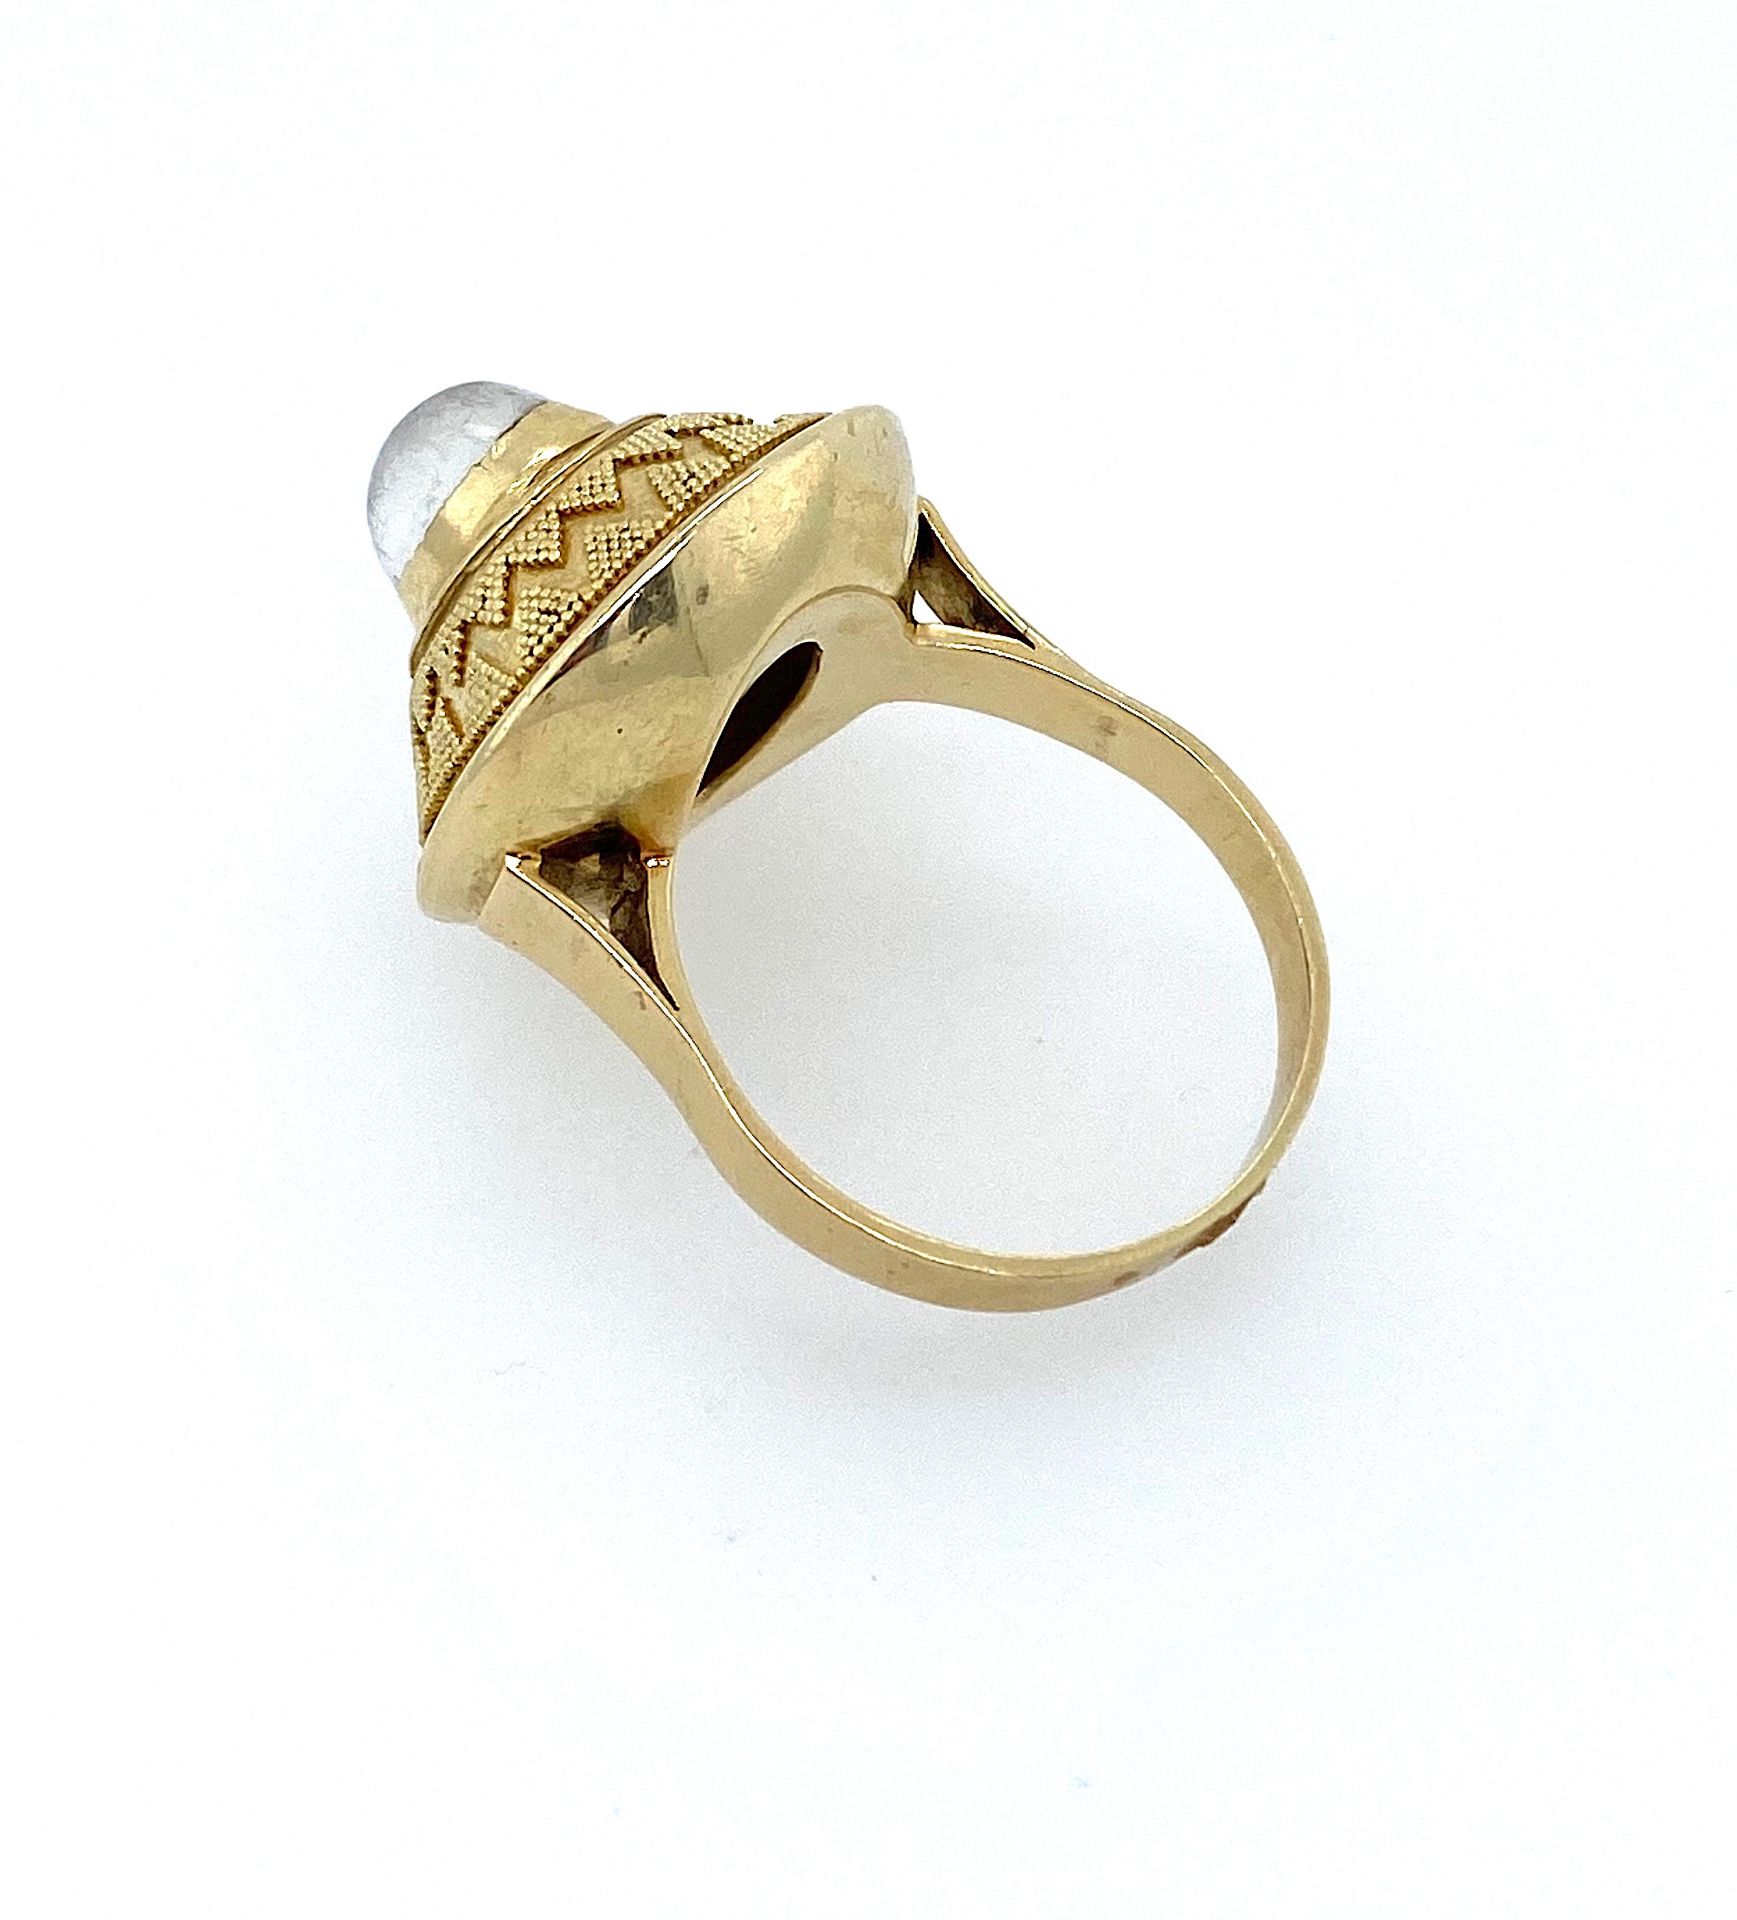 Ring handmade with moonstone 585 gold - Image 3 of 4